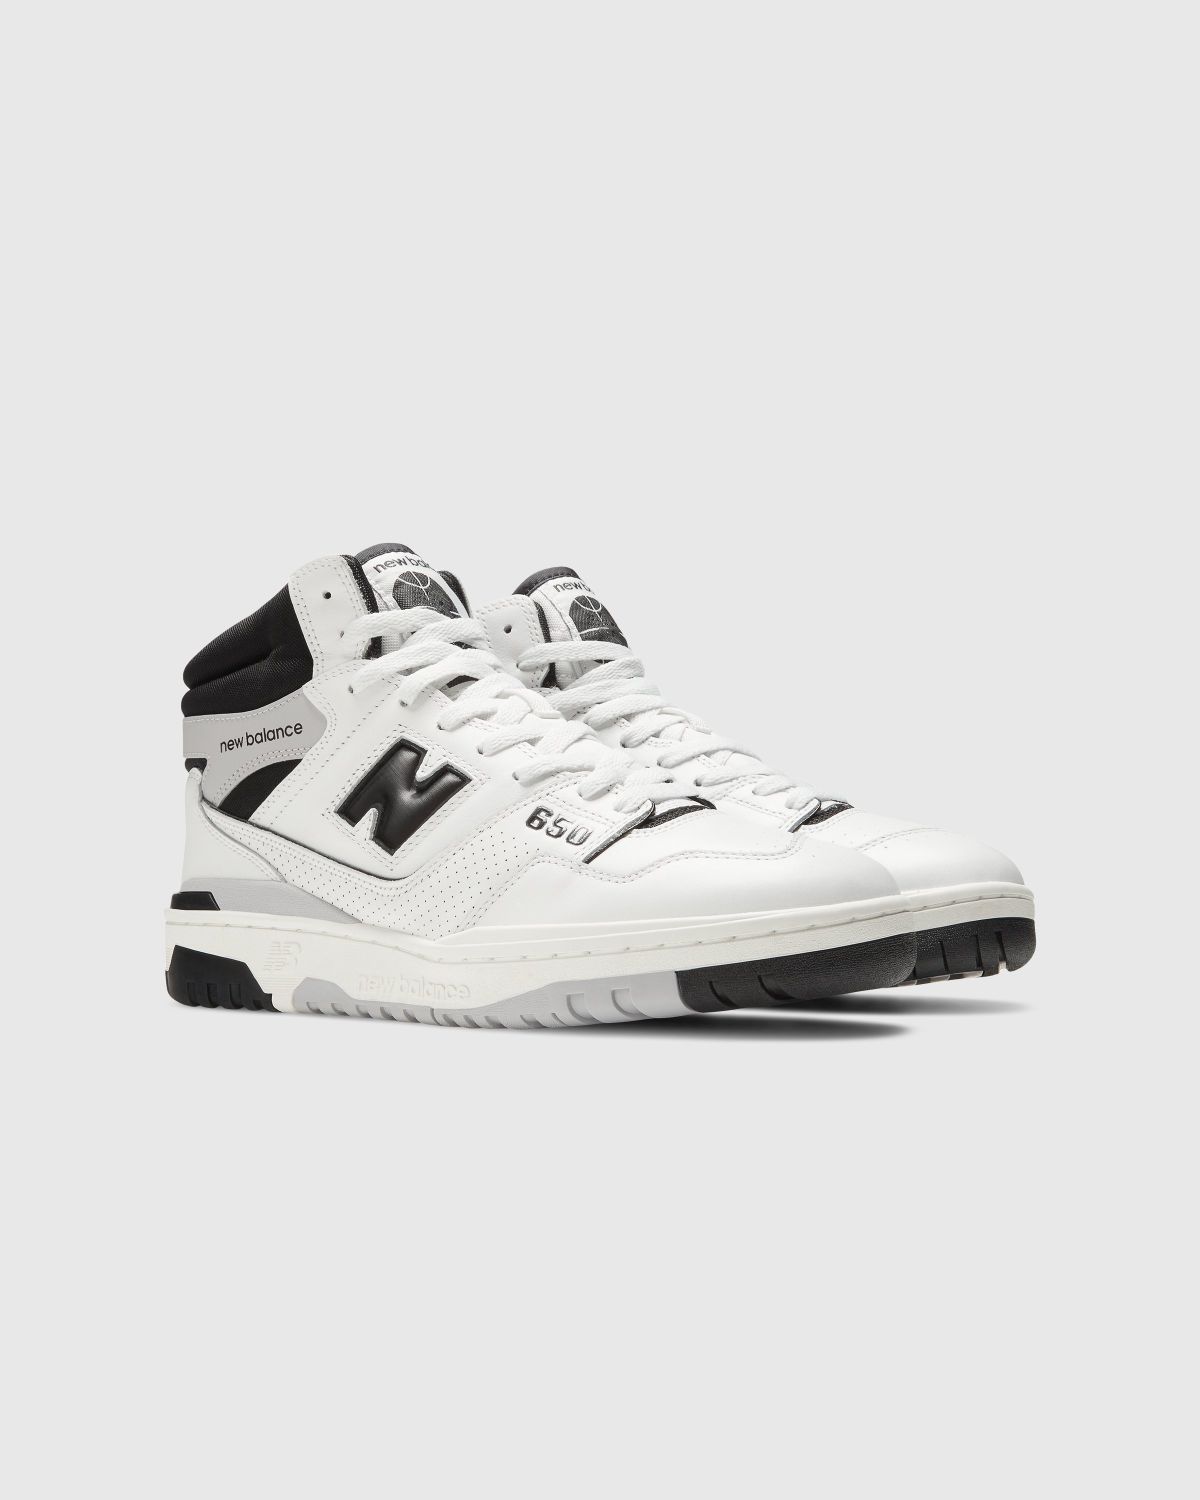 New Balance – BB650RCE White - Sneakers - White - Image 3